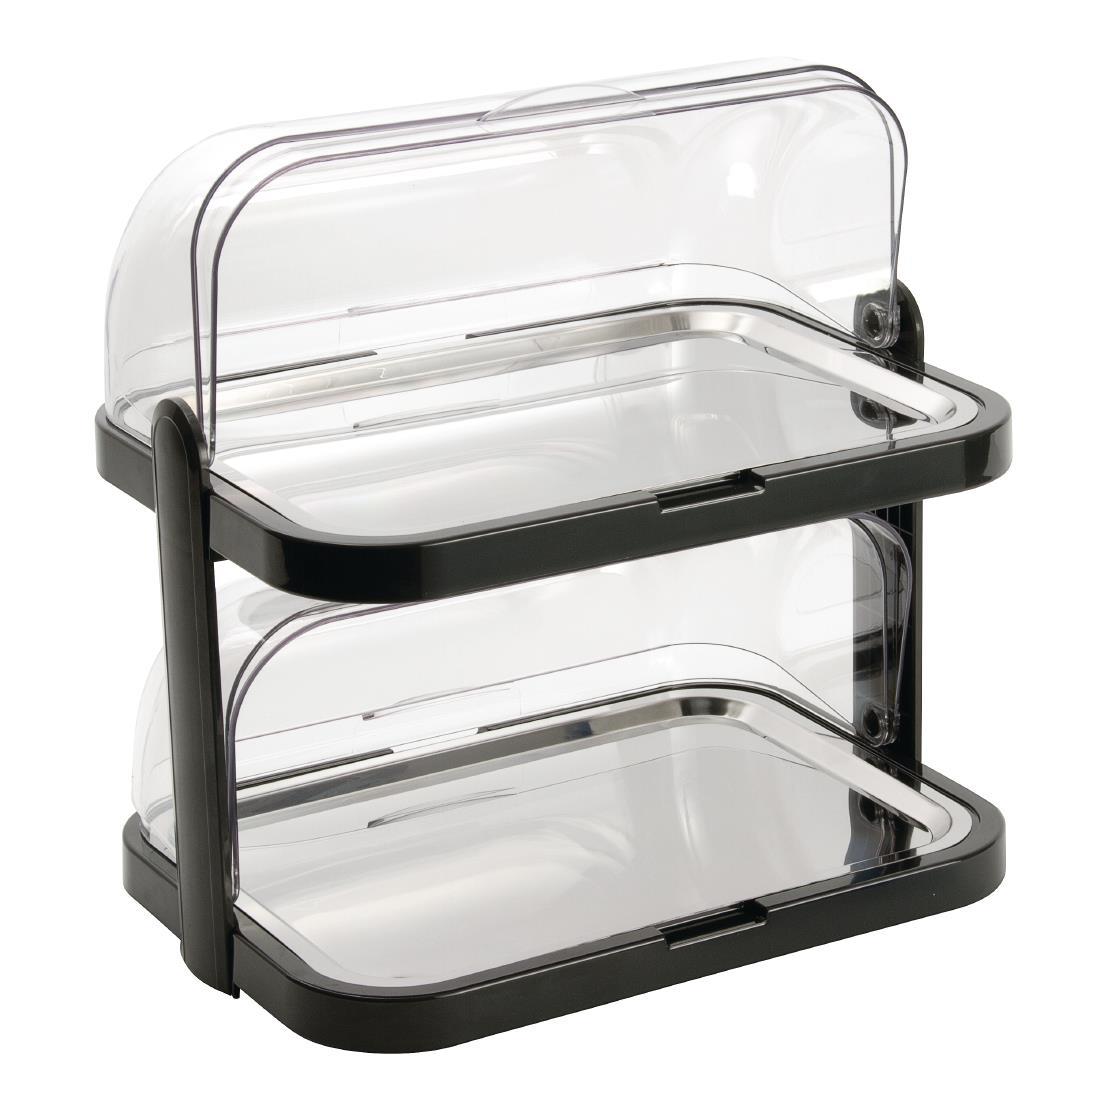 APS Roll Top Cool Display Tray Double Deck - CB794  - 1